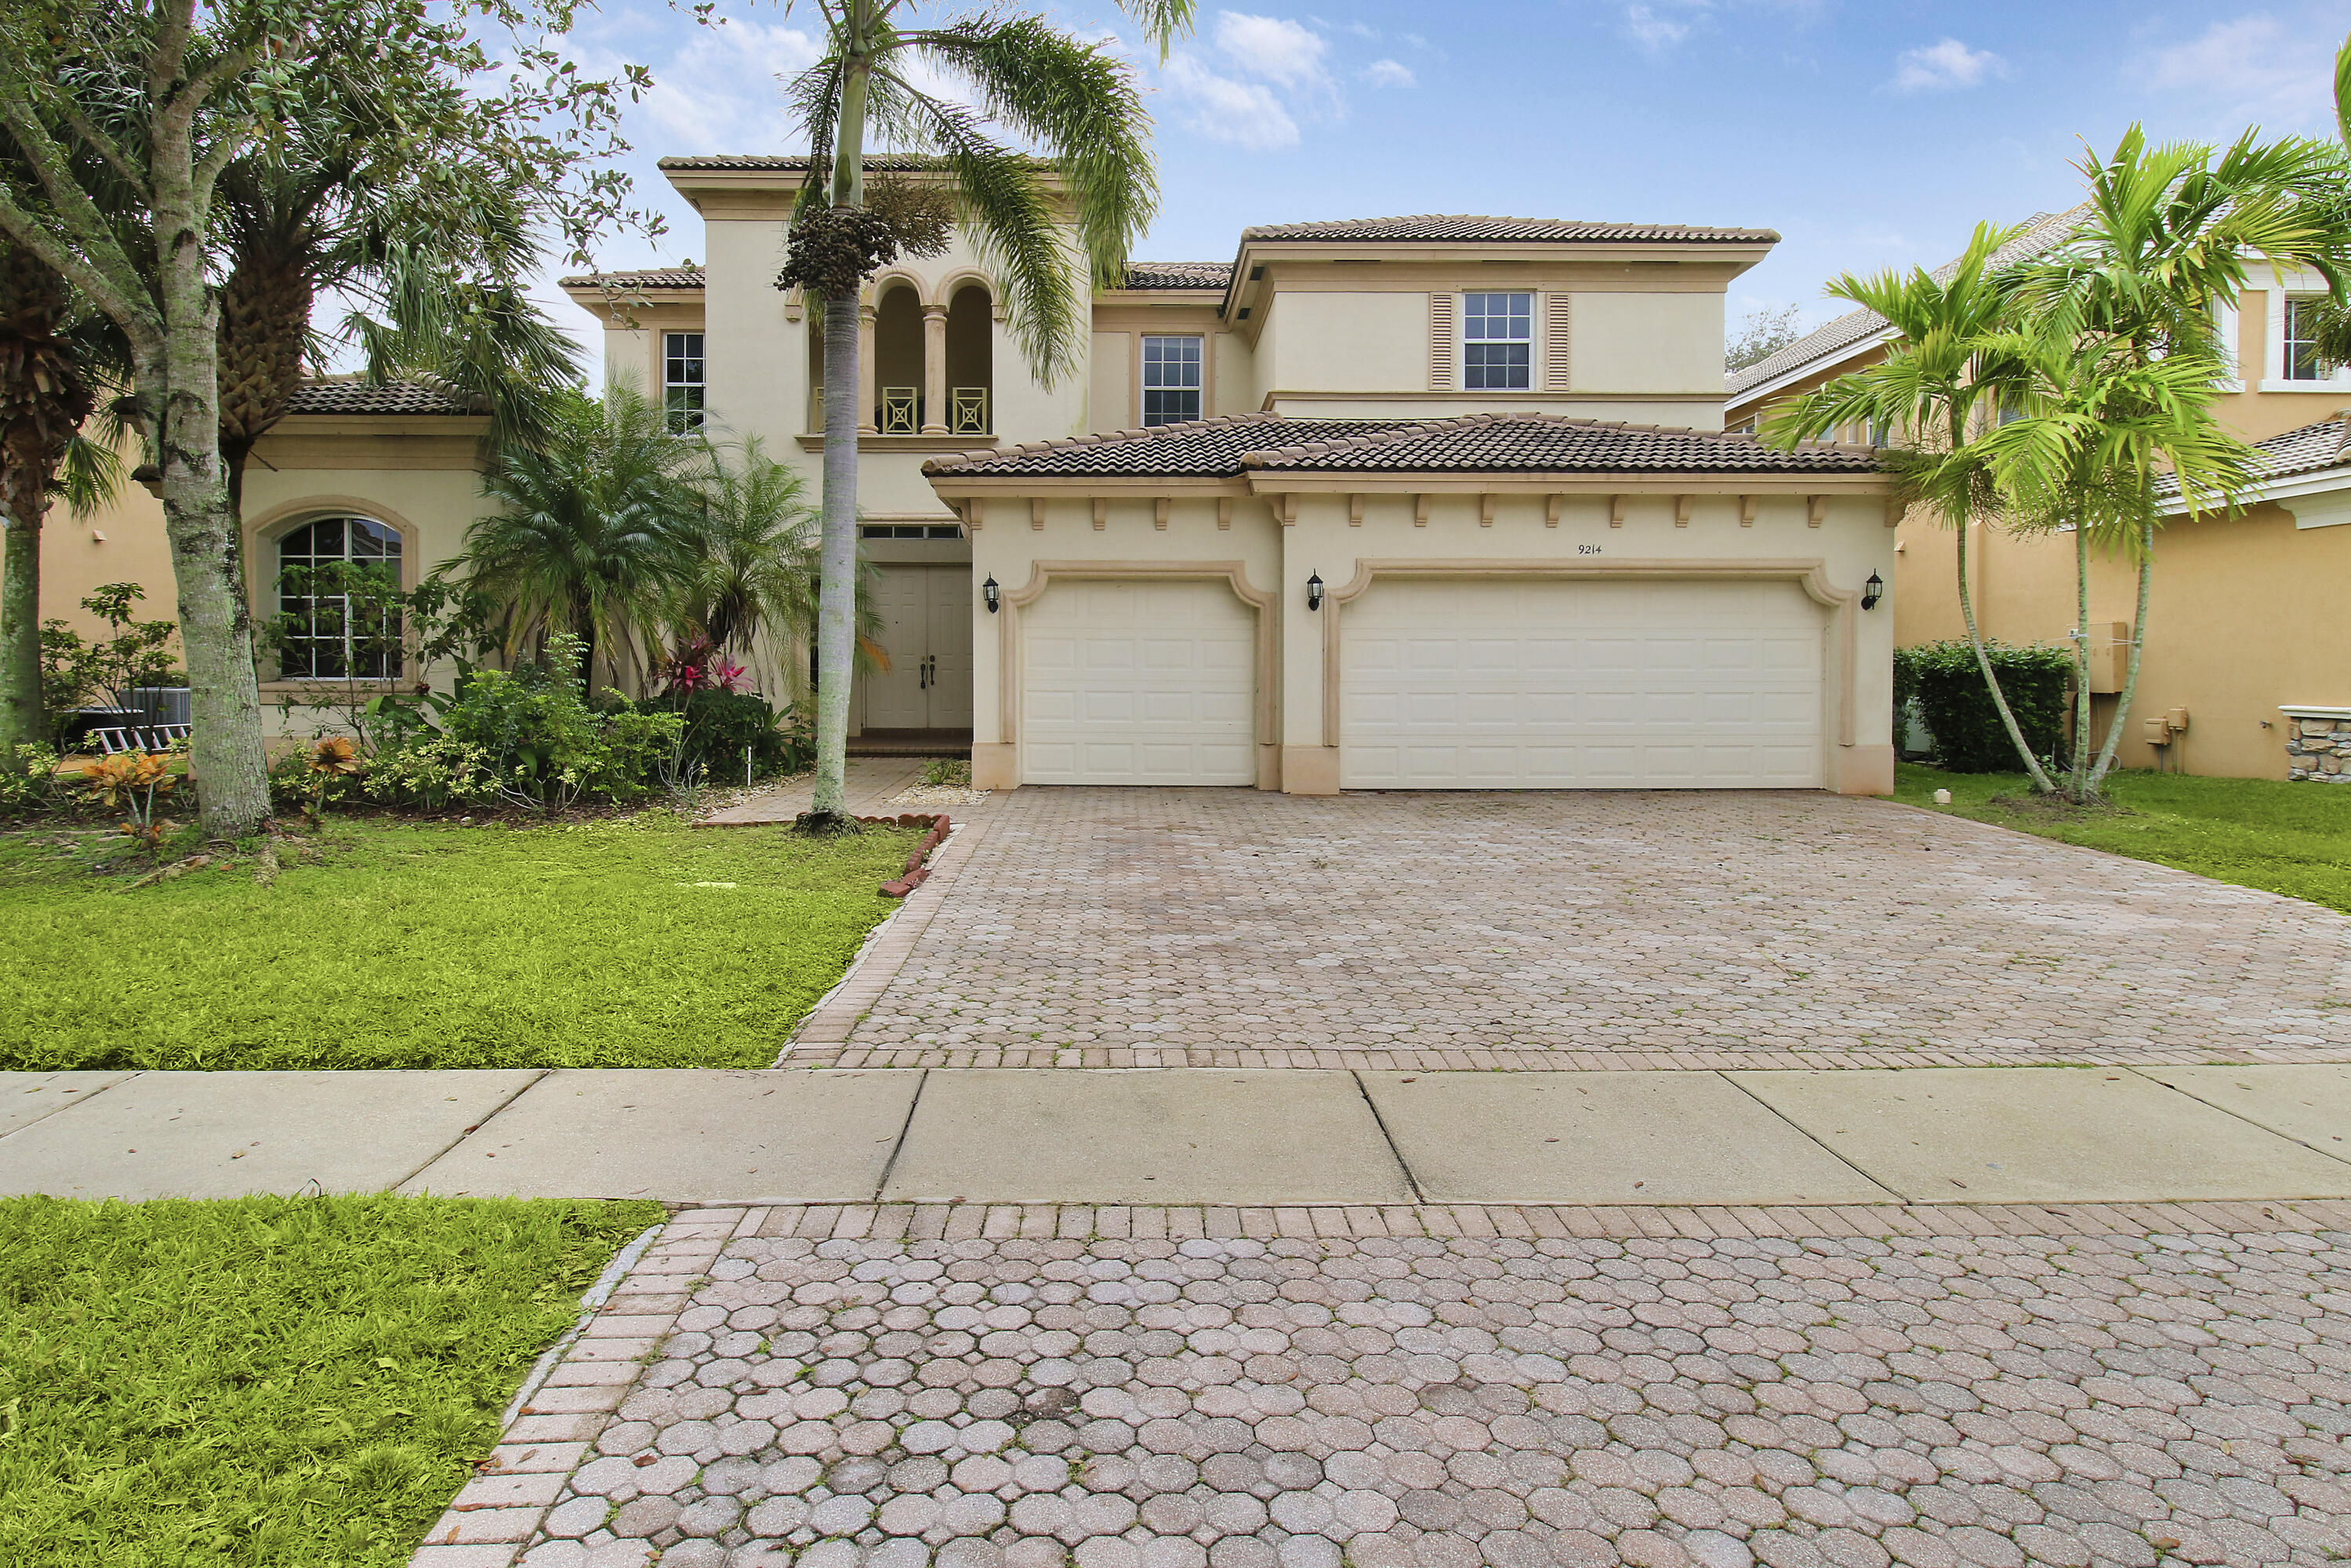 9214 Pineville Drive, Lake Worth, Palm Beach County, Florida - 5 Bedrooms  
4 Bathrooms - 